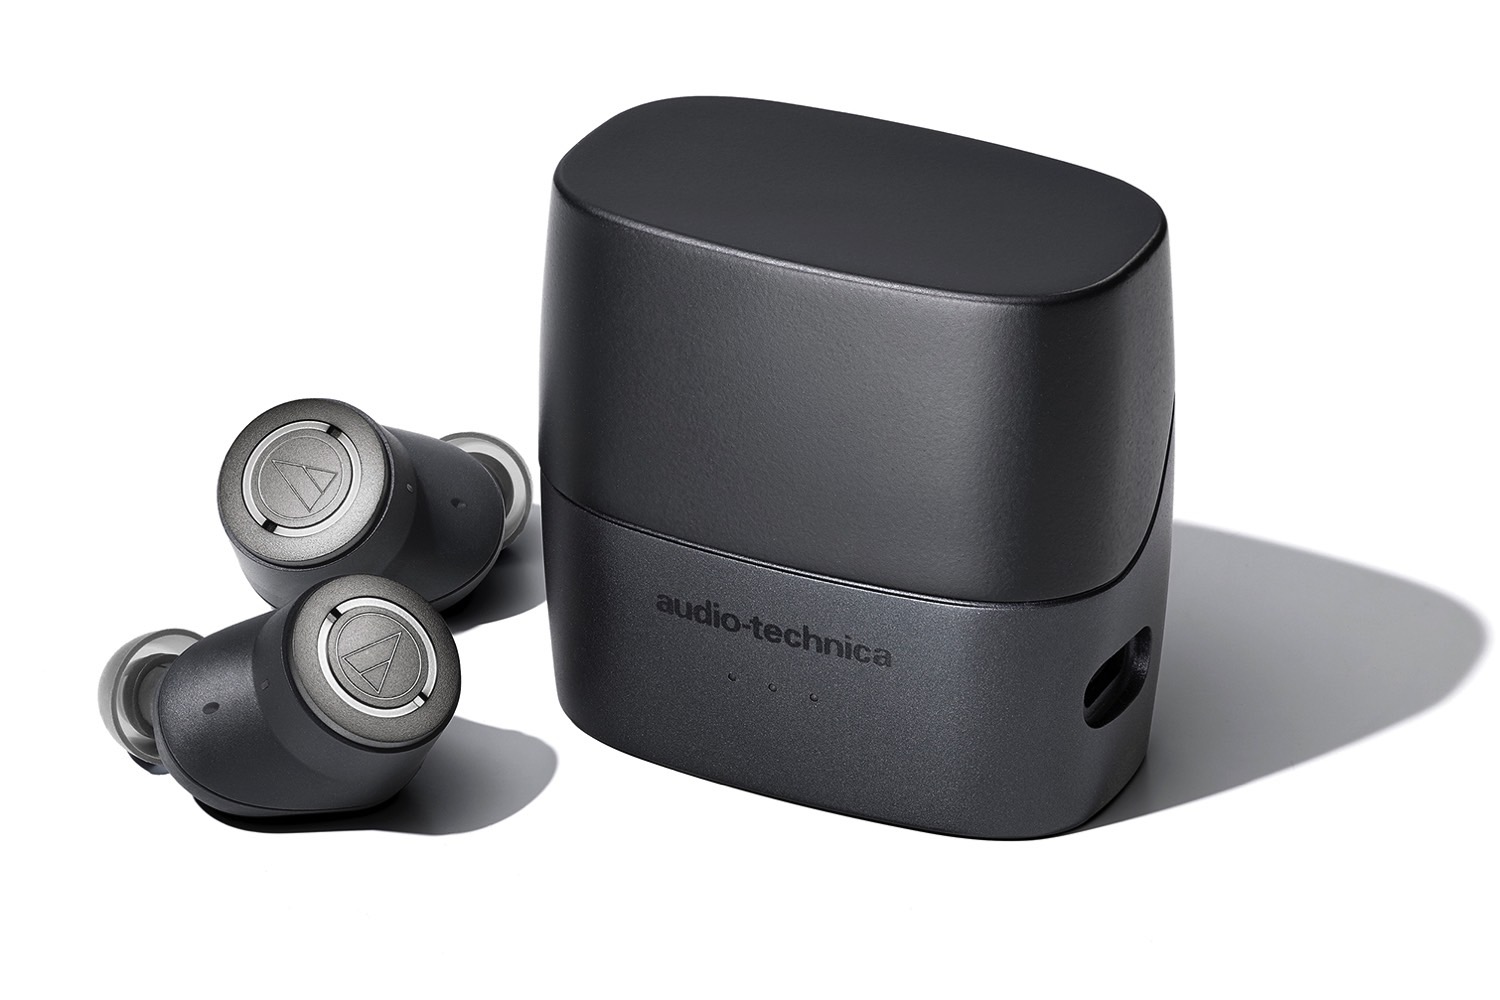 audio-technica ath-anc300tw noise-canceling earbuds